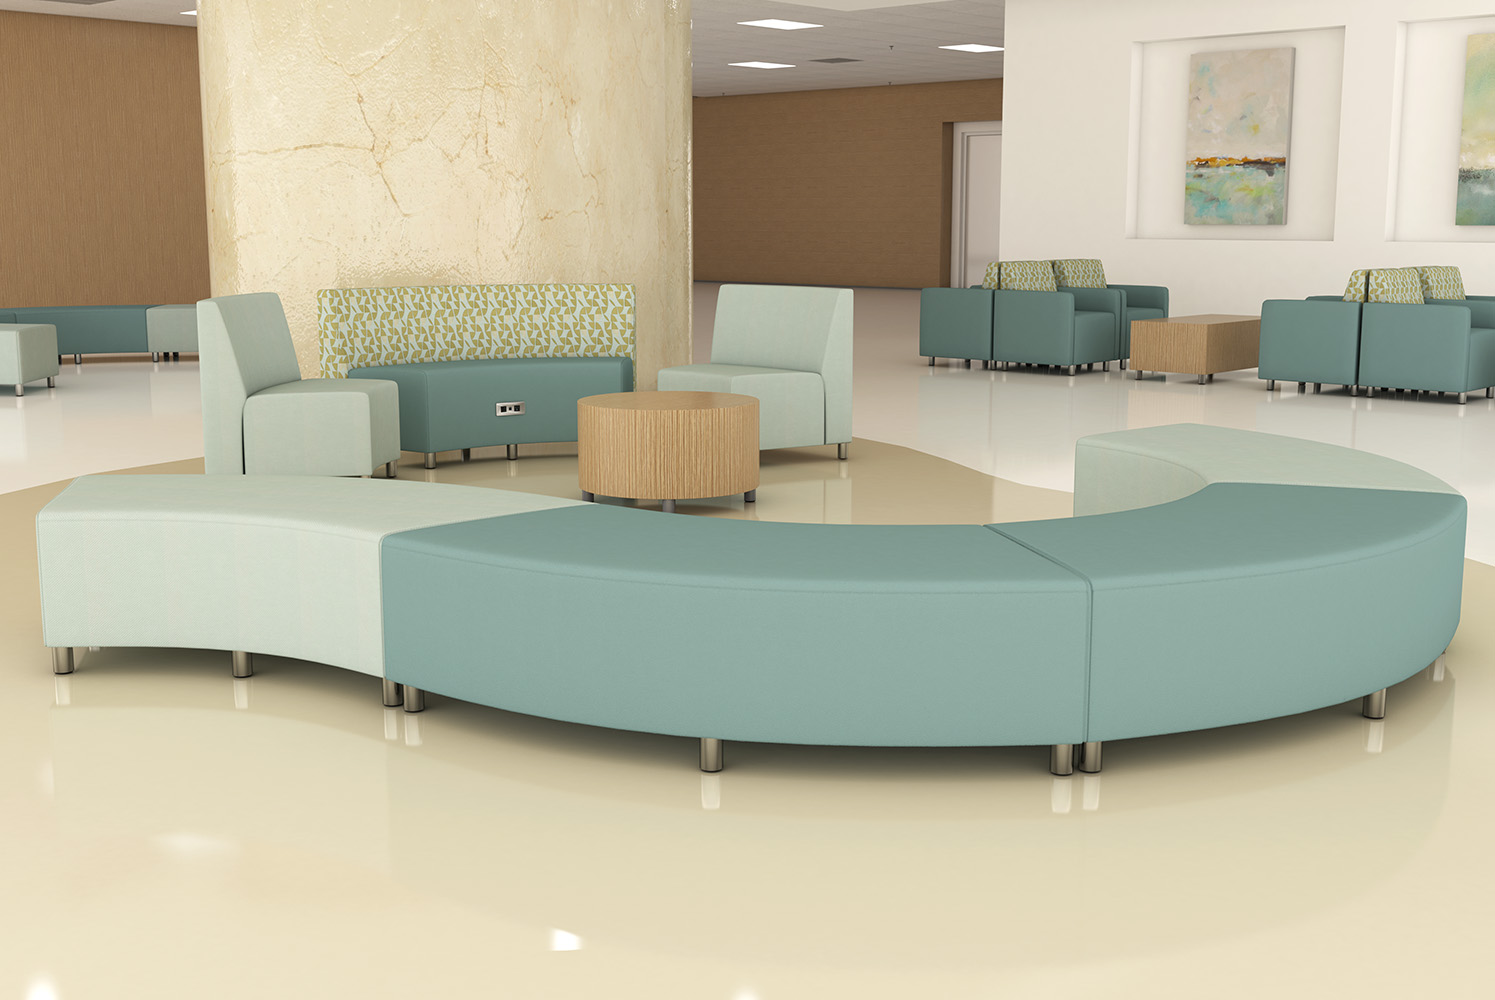 Lobby featuring Raven modular seating and Treno occasional tables